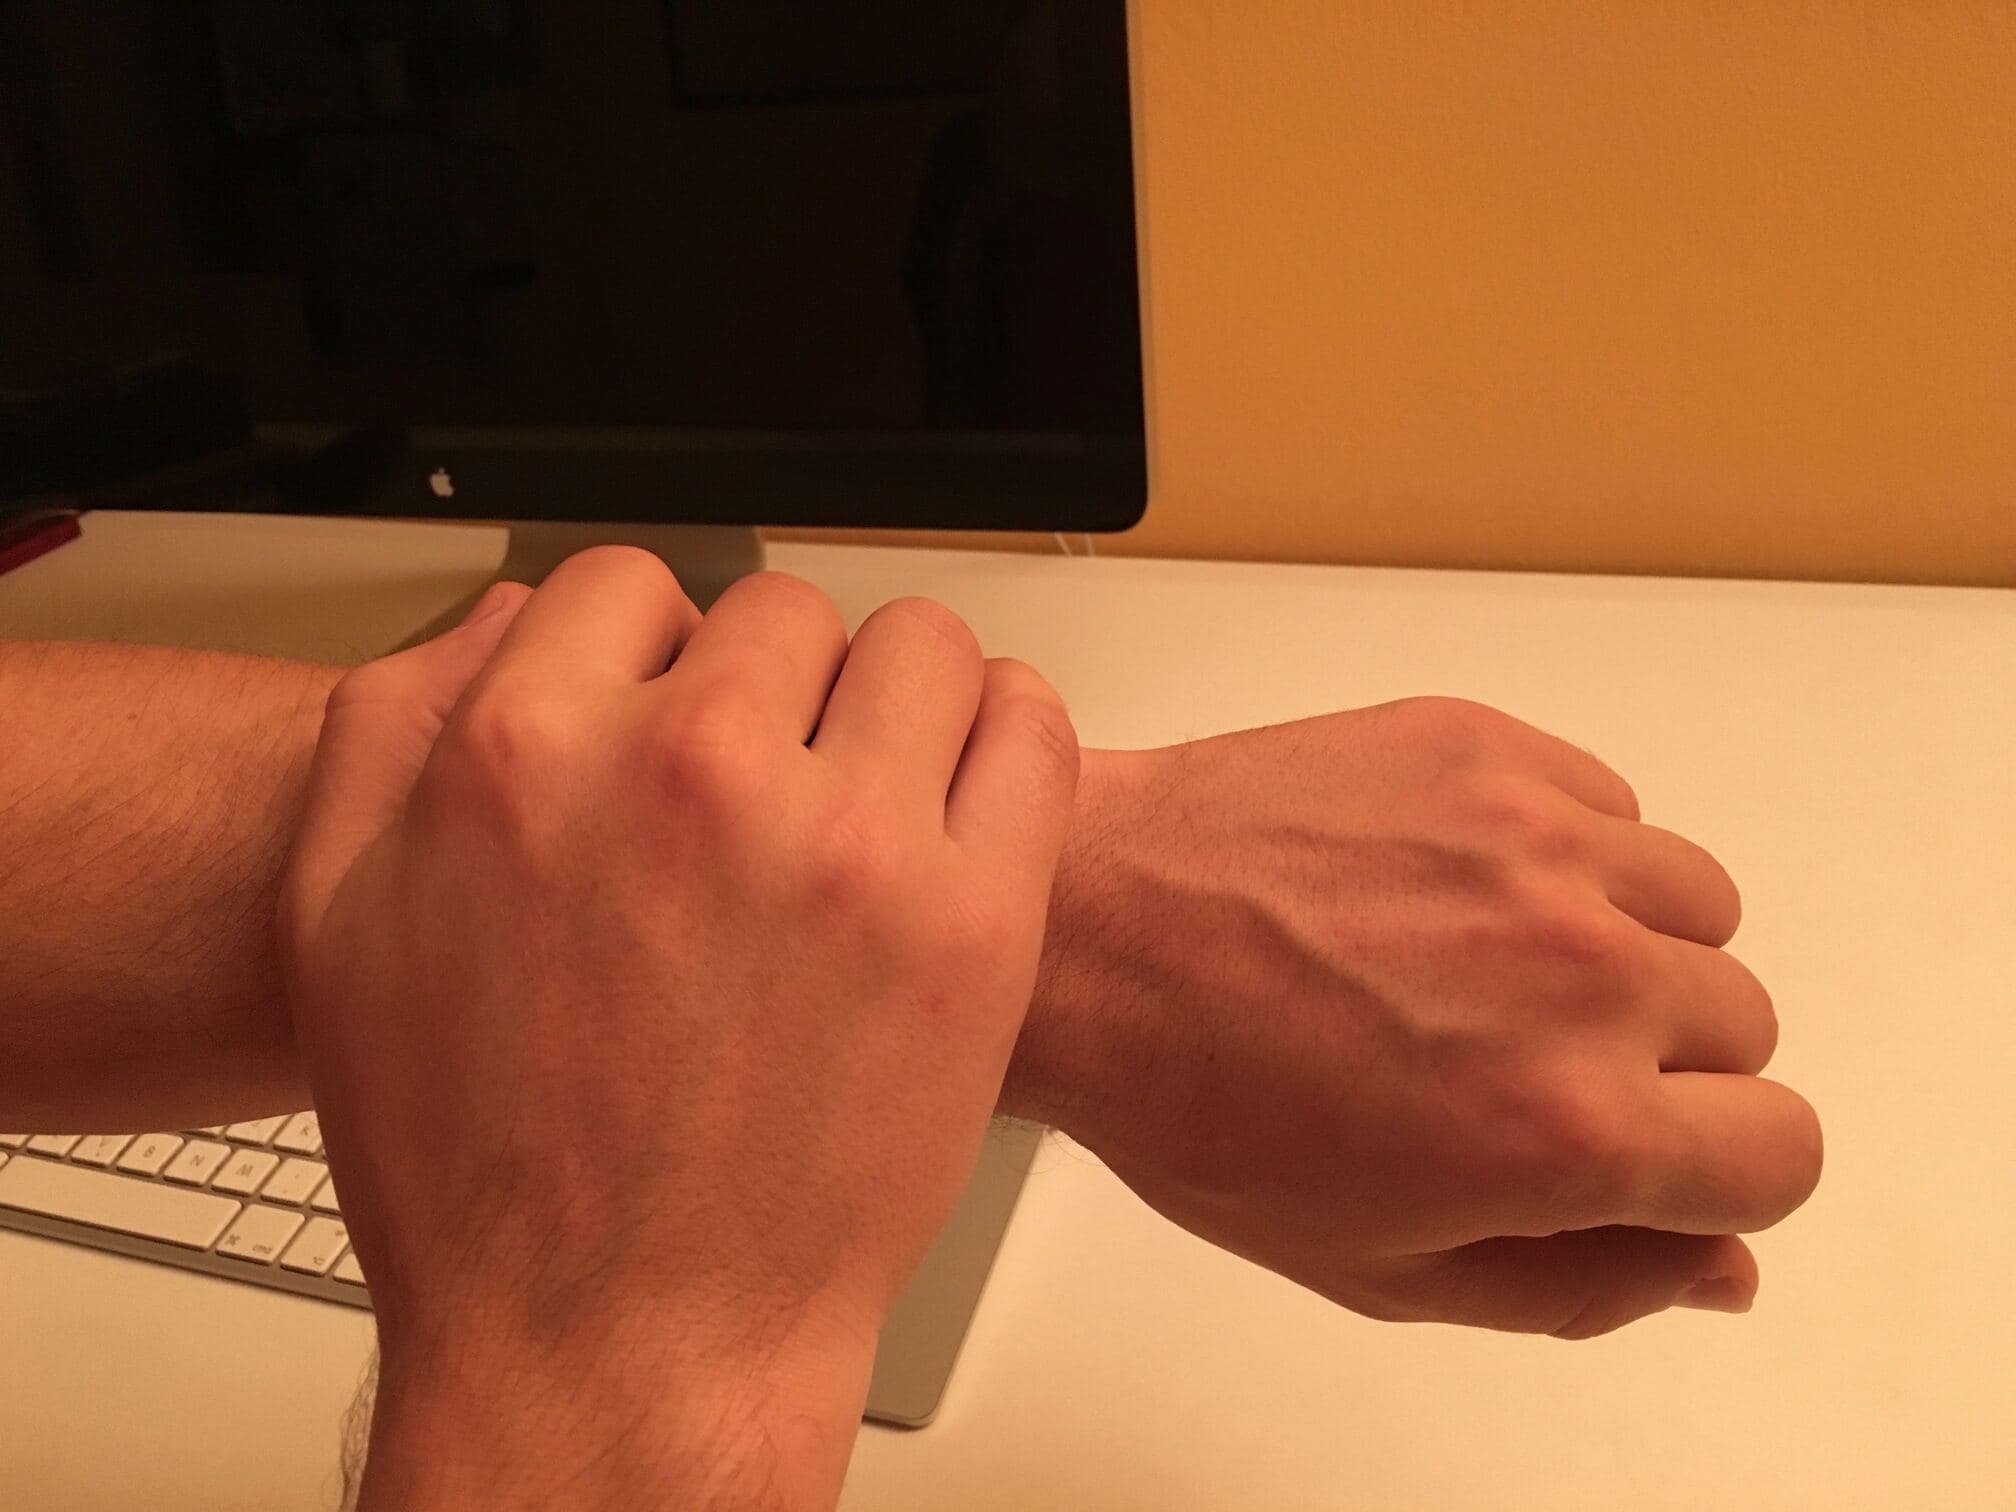 Covering Apple Watch with a palm to mute notifications and alarms